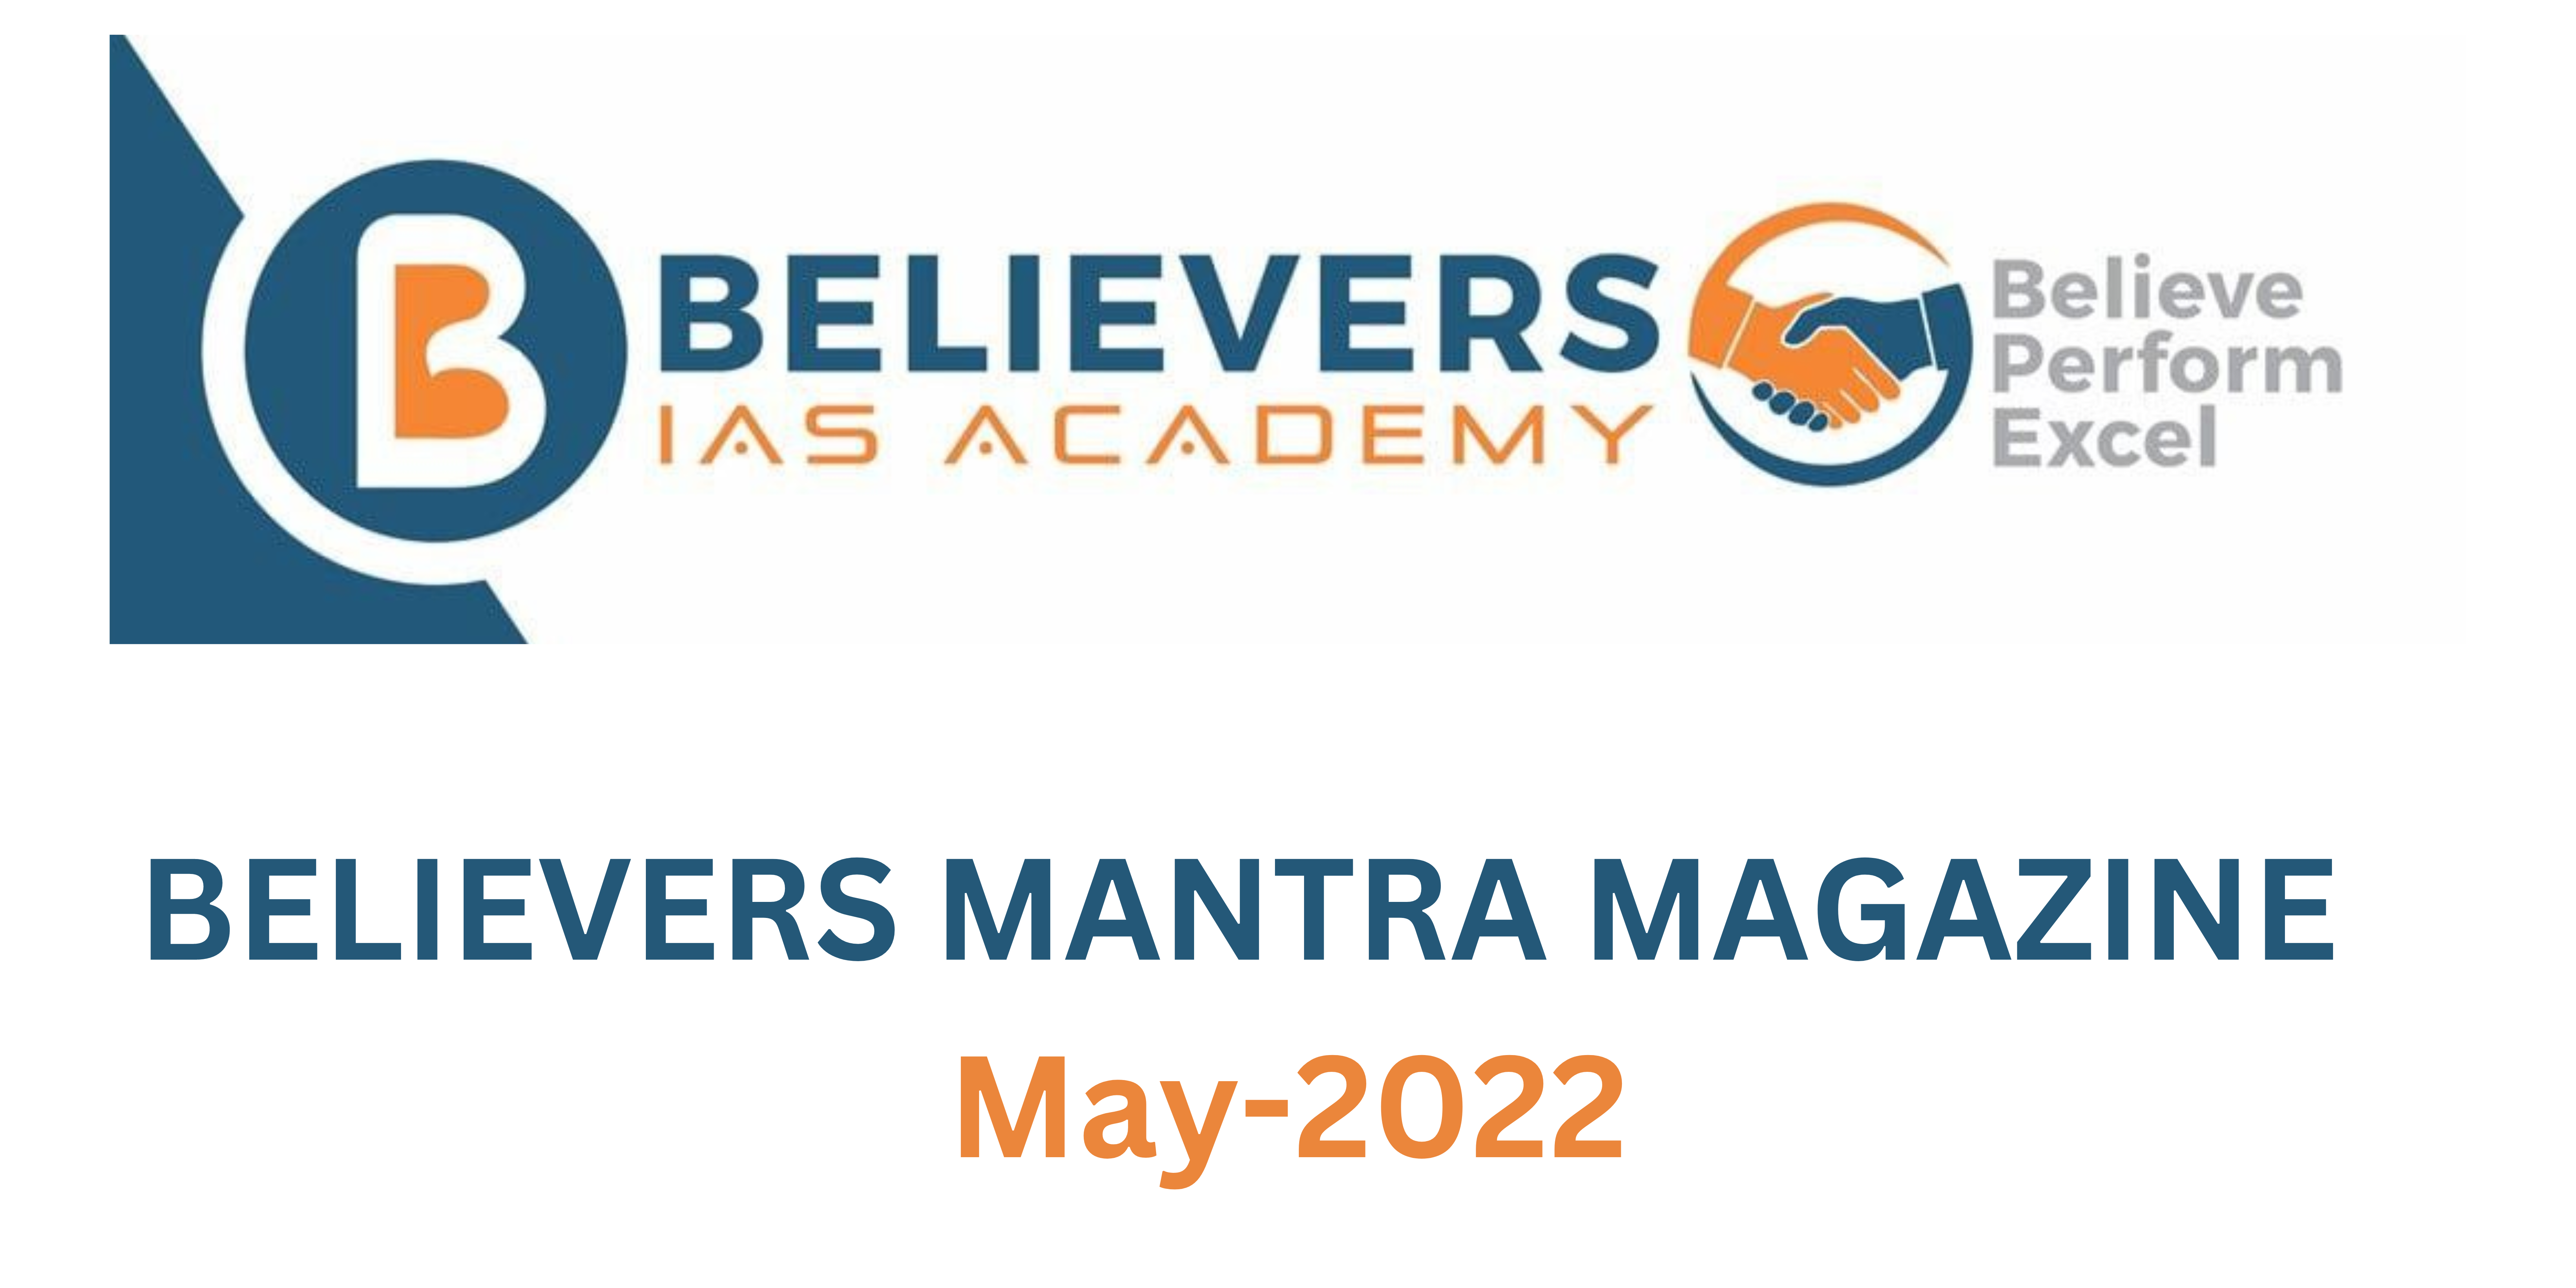 Believers Mantra Magazine - May 2022